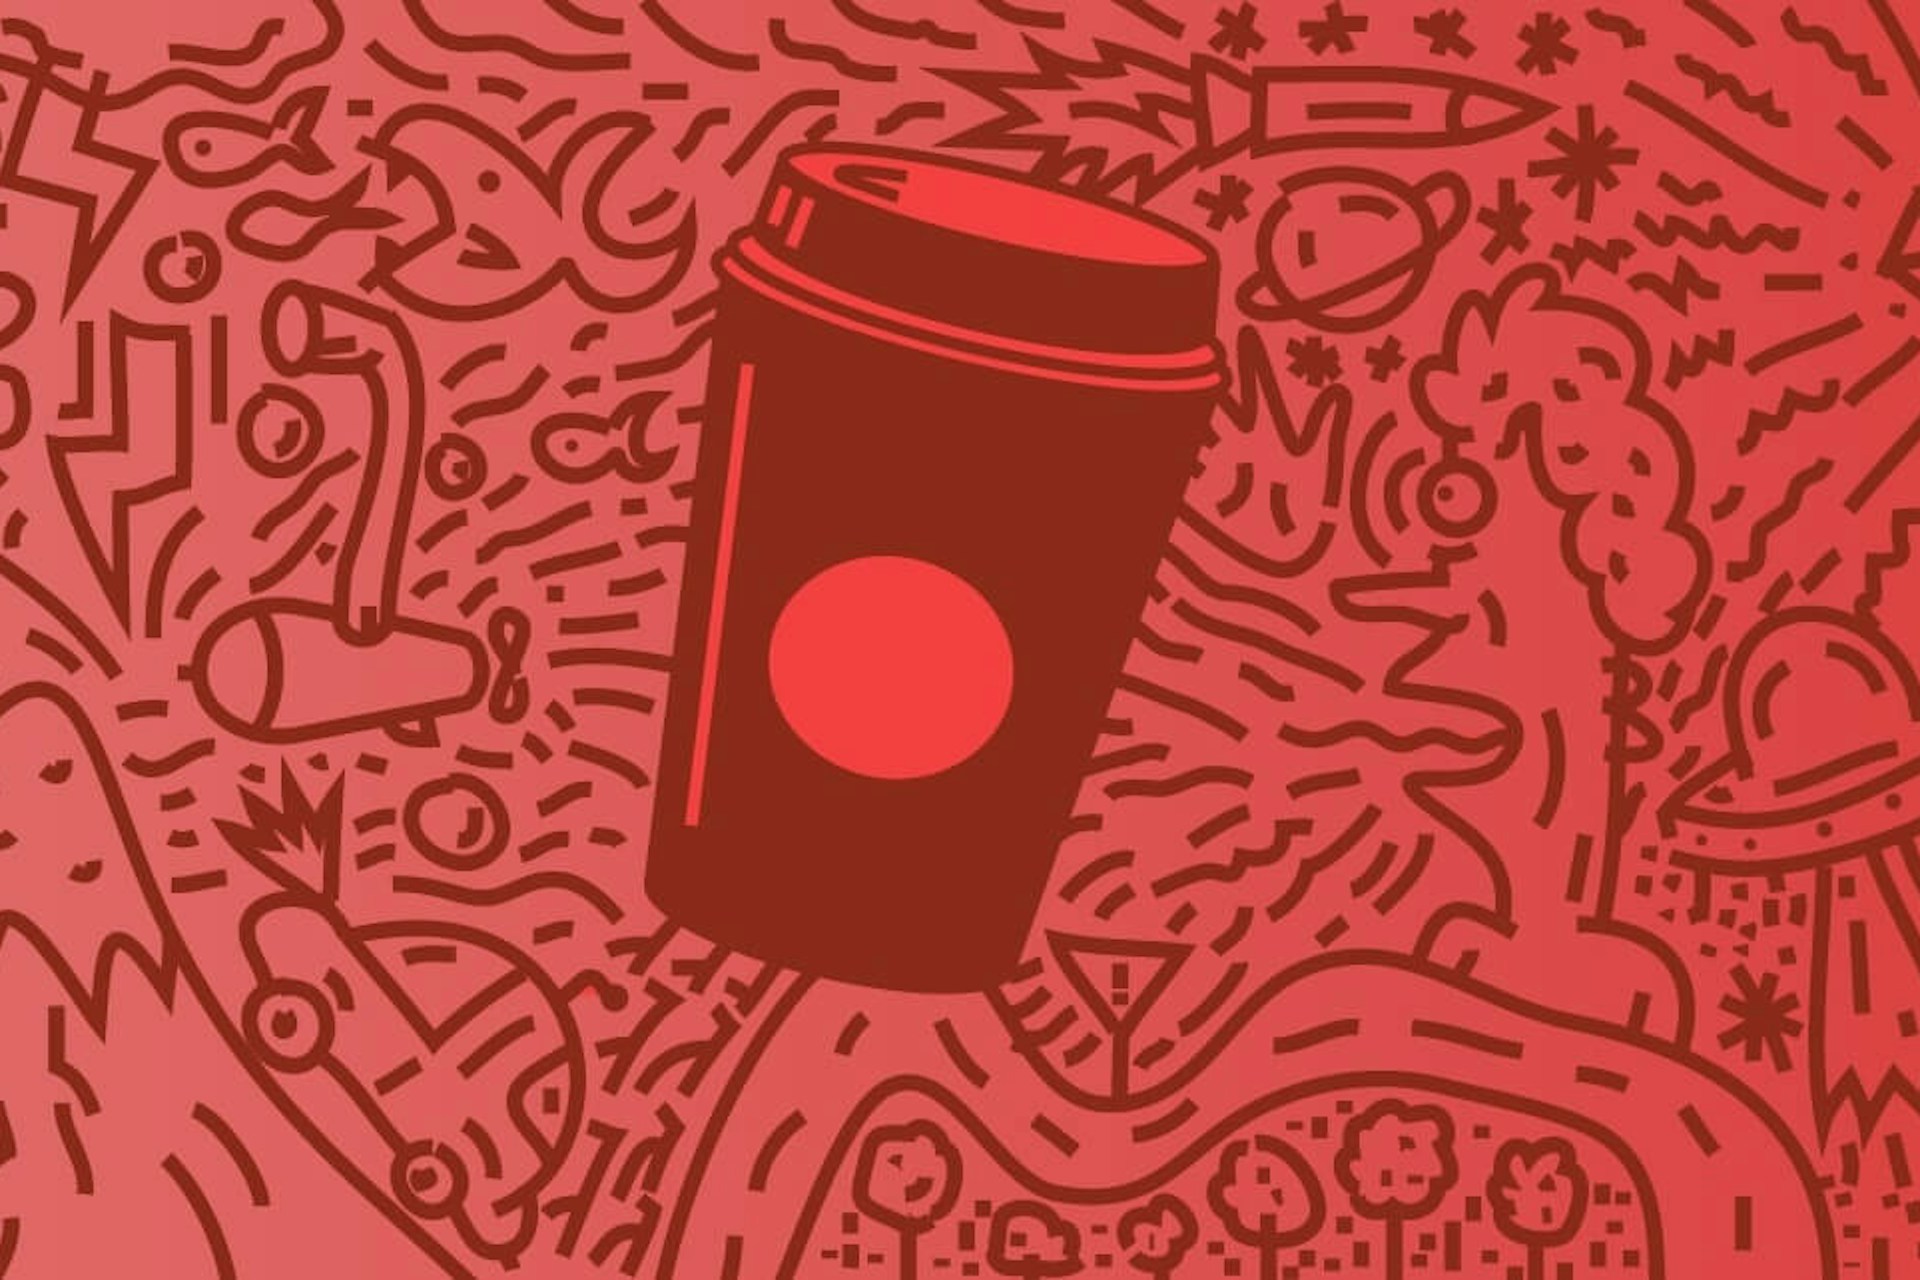 Starbucks Red Cups influencer marketing campaign illustration